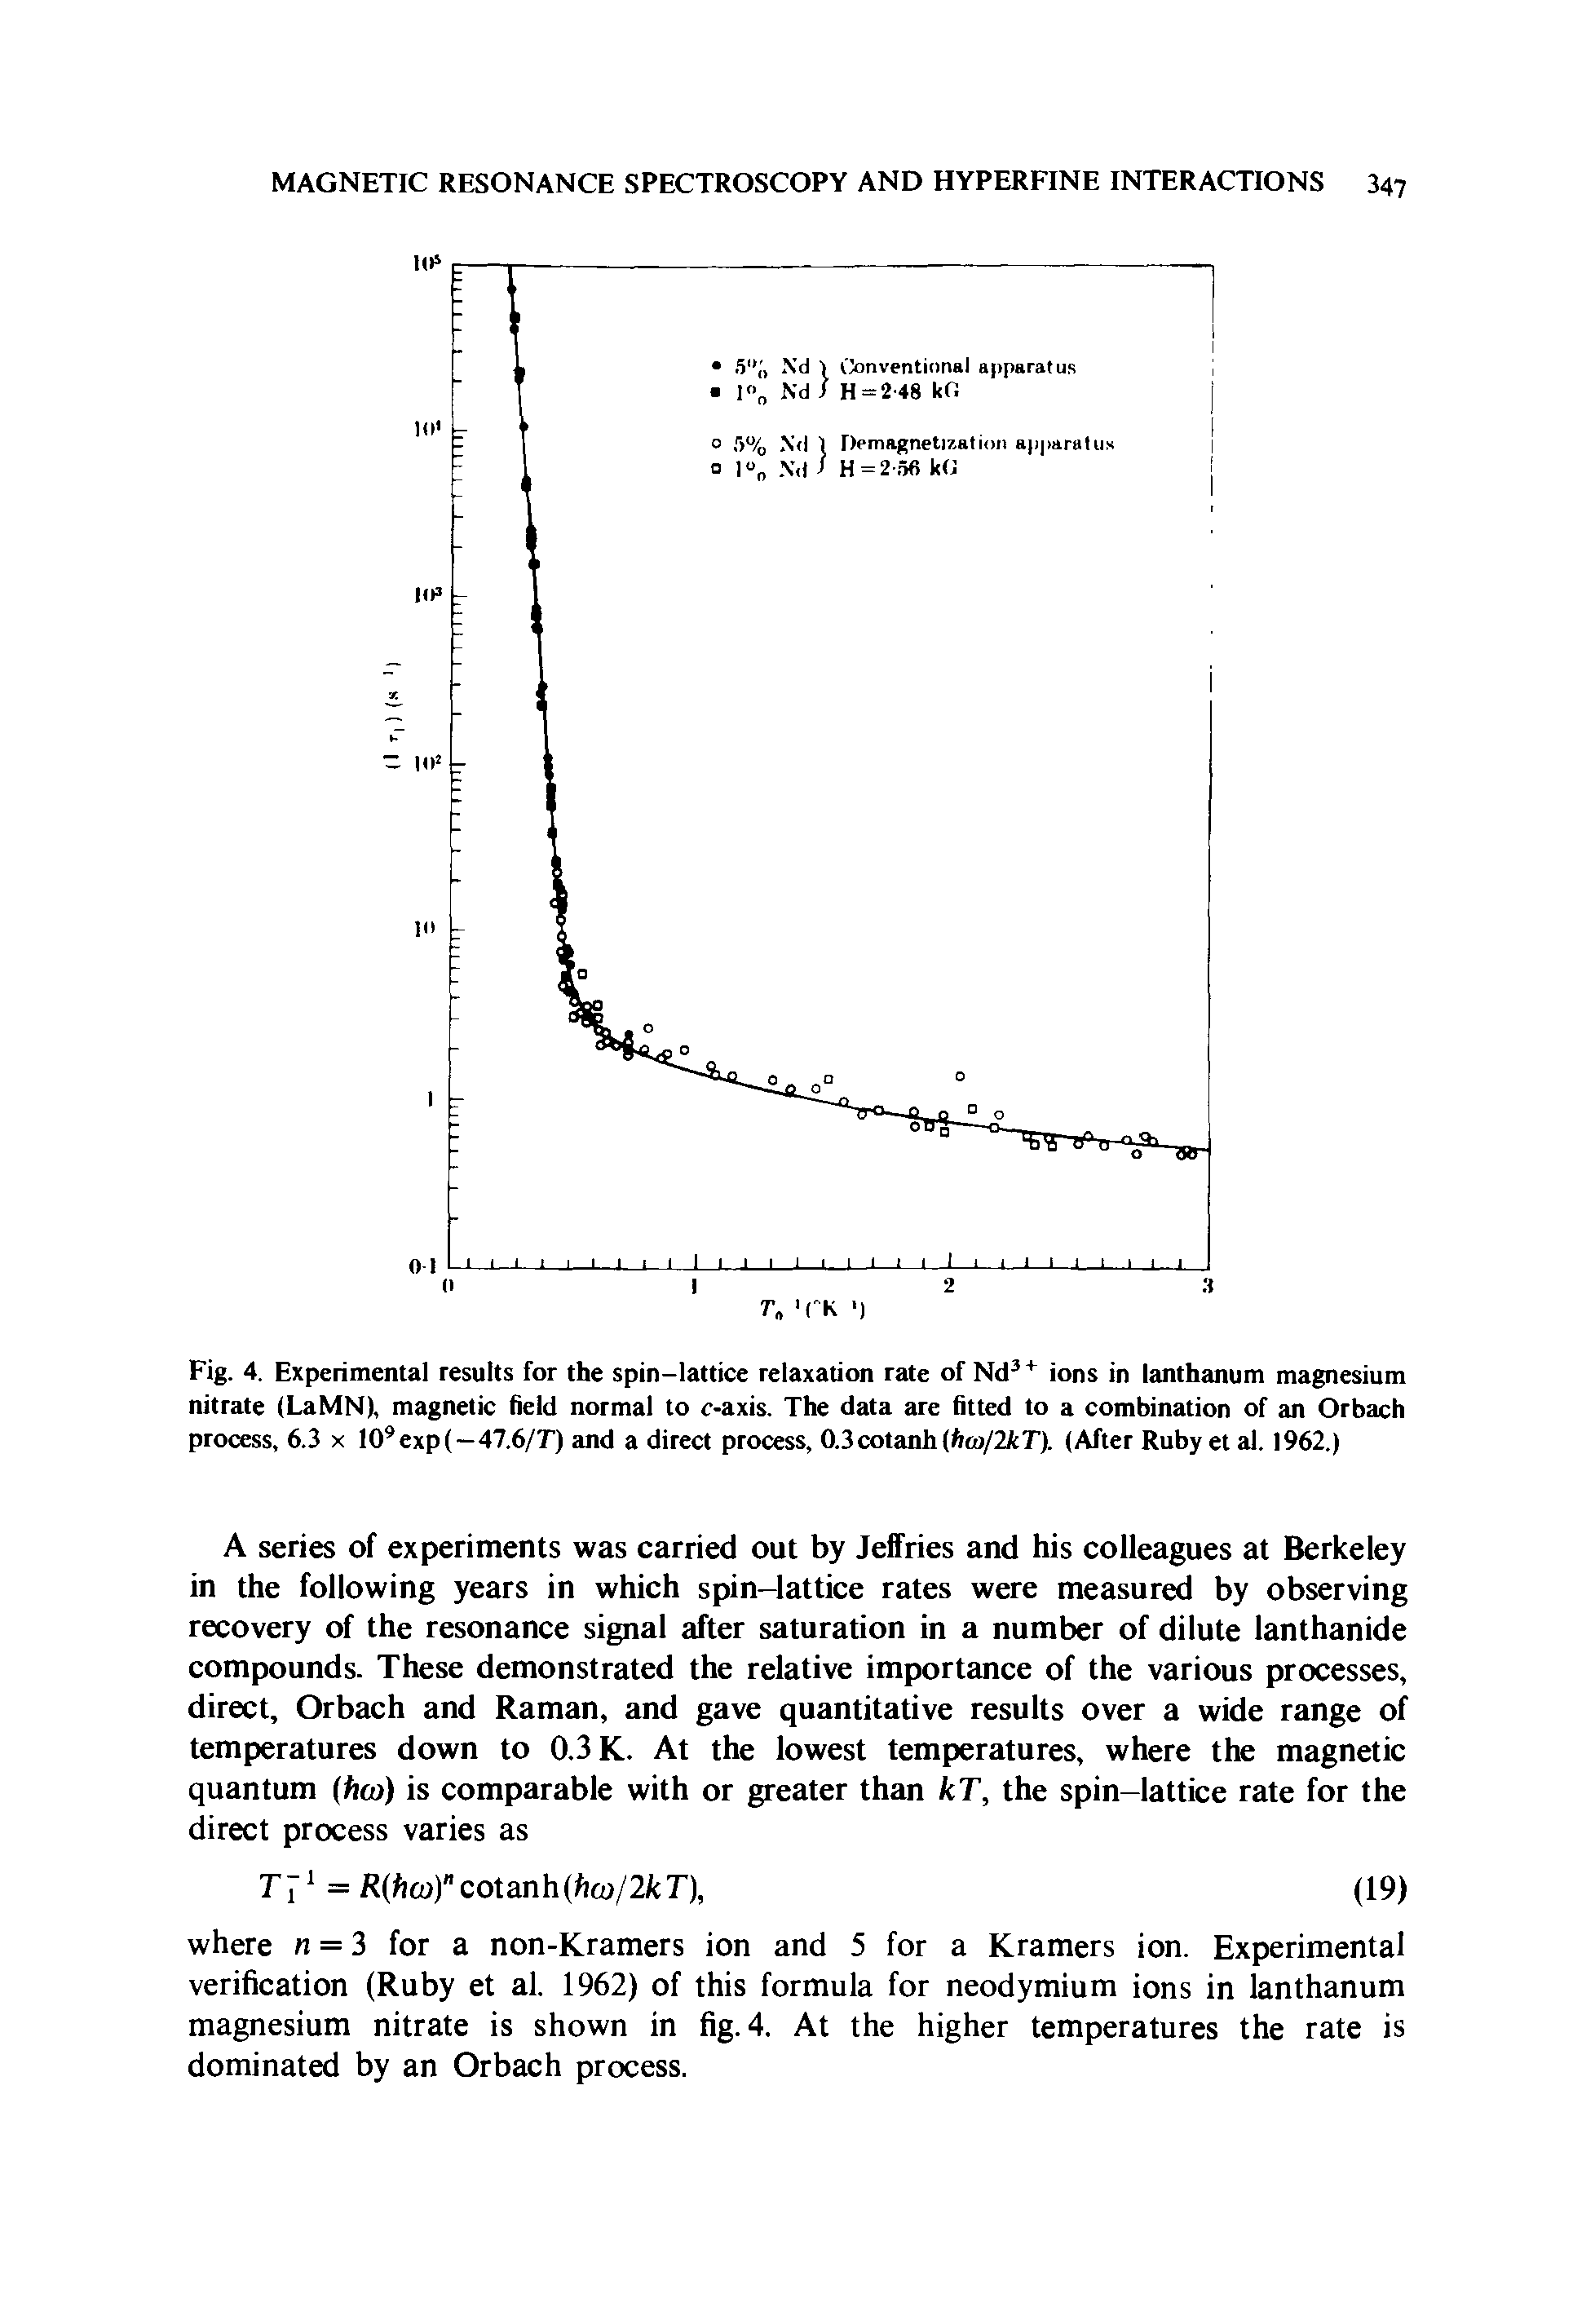 Fig. 4. Experimental results for the spin-lattice relaxation rate of Nd ions in lanthanum magnesium nitrate (LaMN), magnetic field normal to c-axis. The data are fitted to a combination of an Orbach process, 6.3 x lO expf—47.6/T) and a direct process, 0.3cotanh(h( /2fcr). (After Ruby et al. 1962.)...